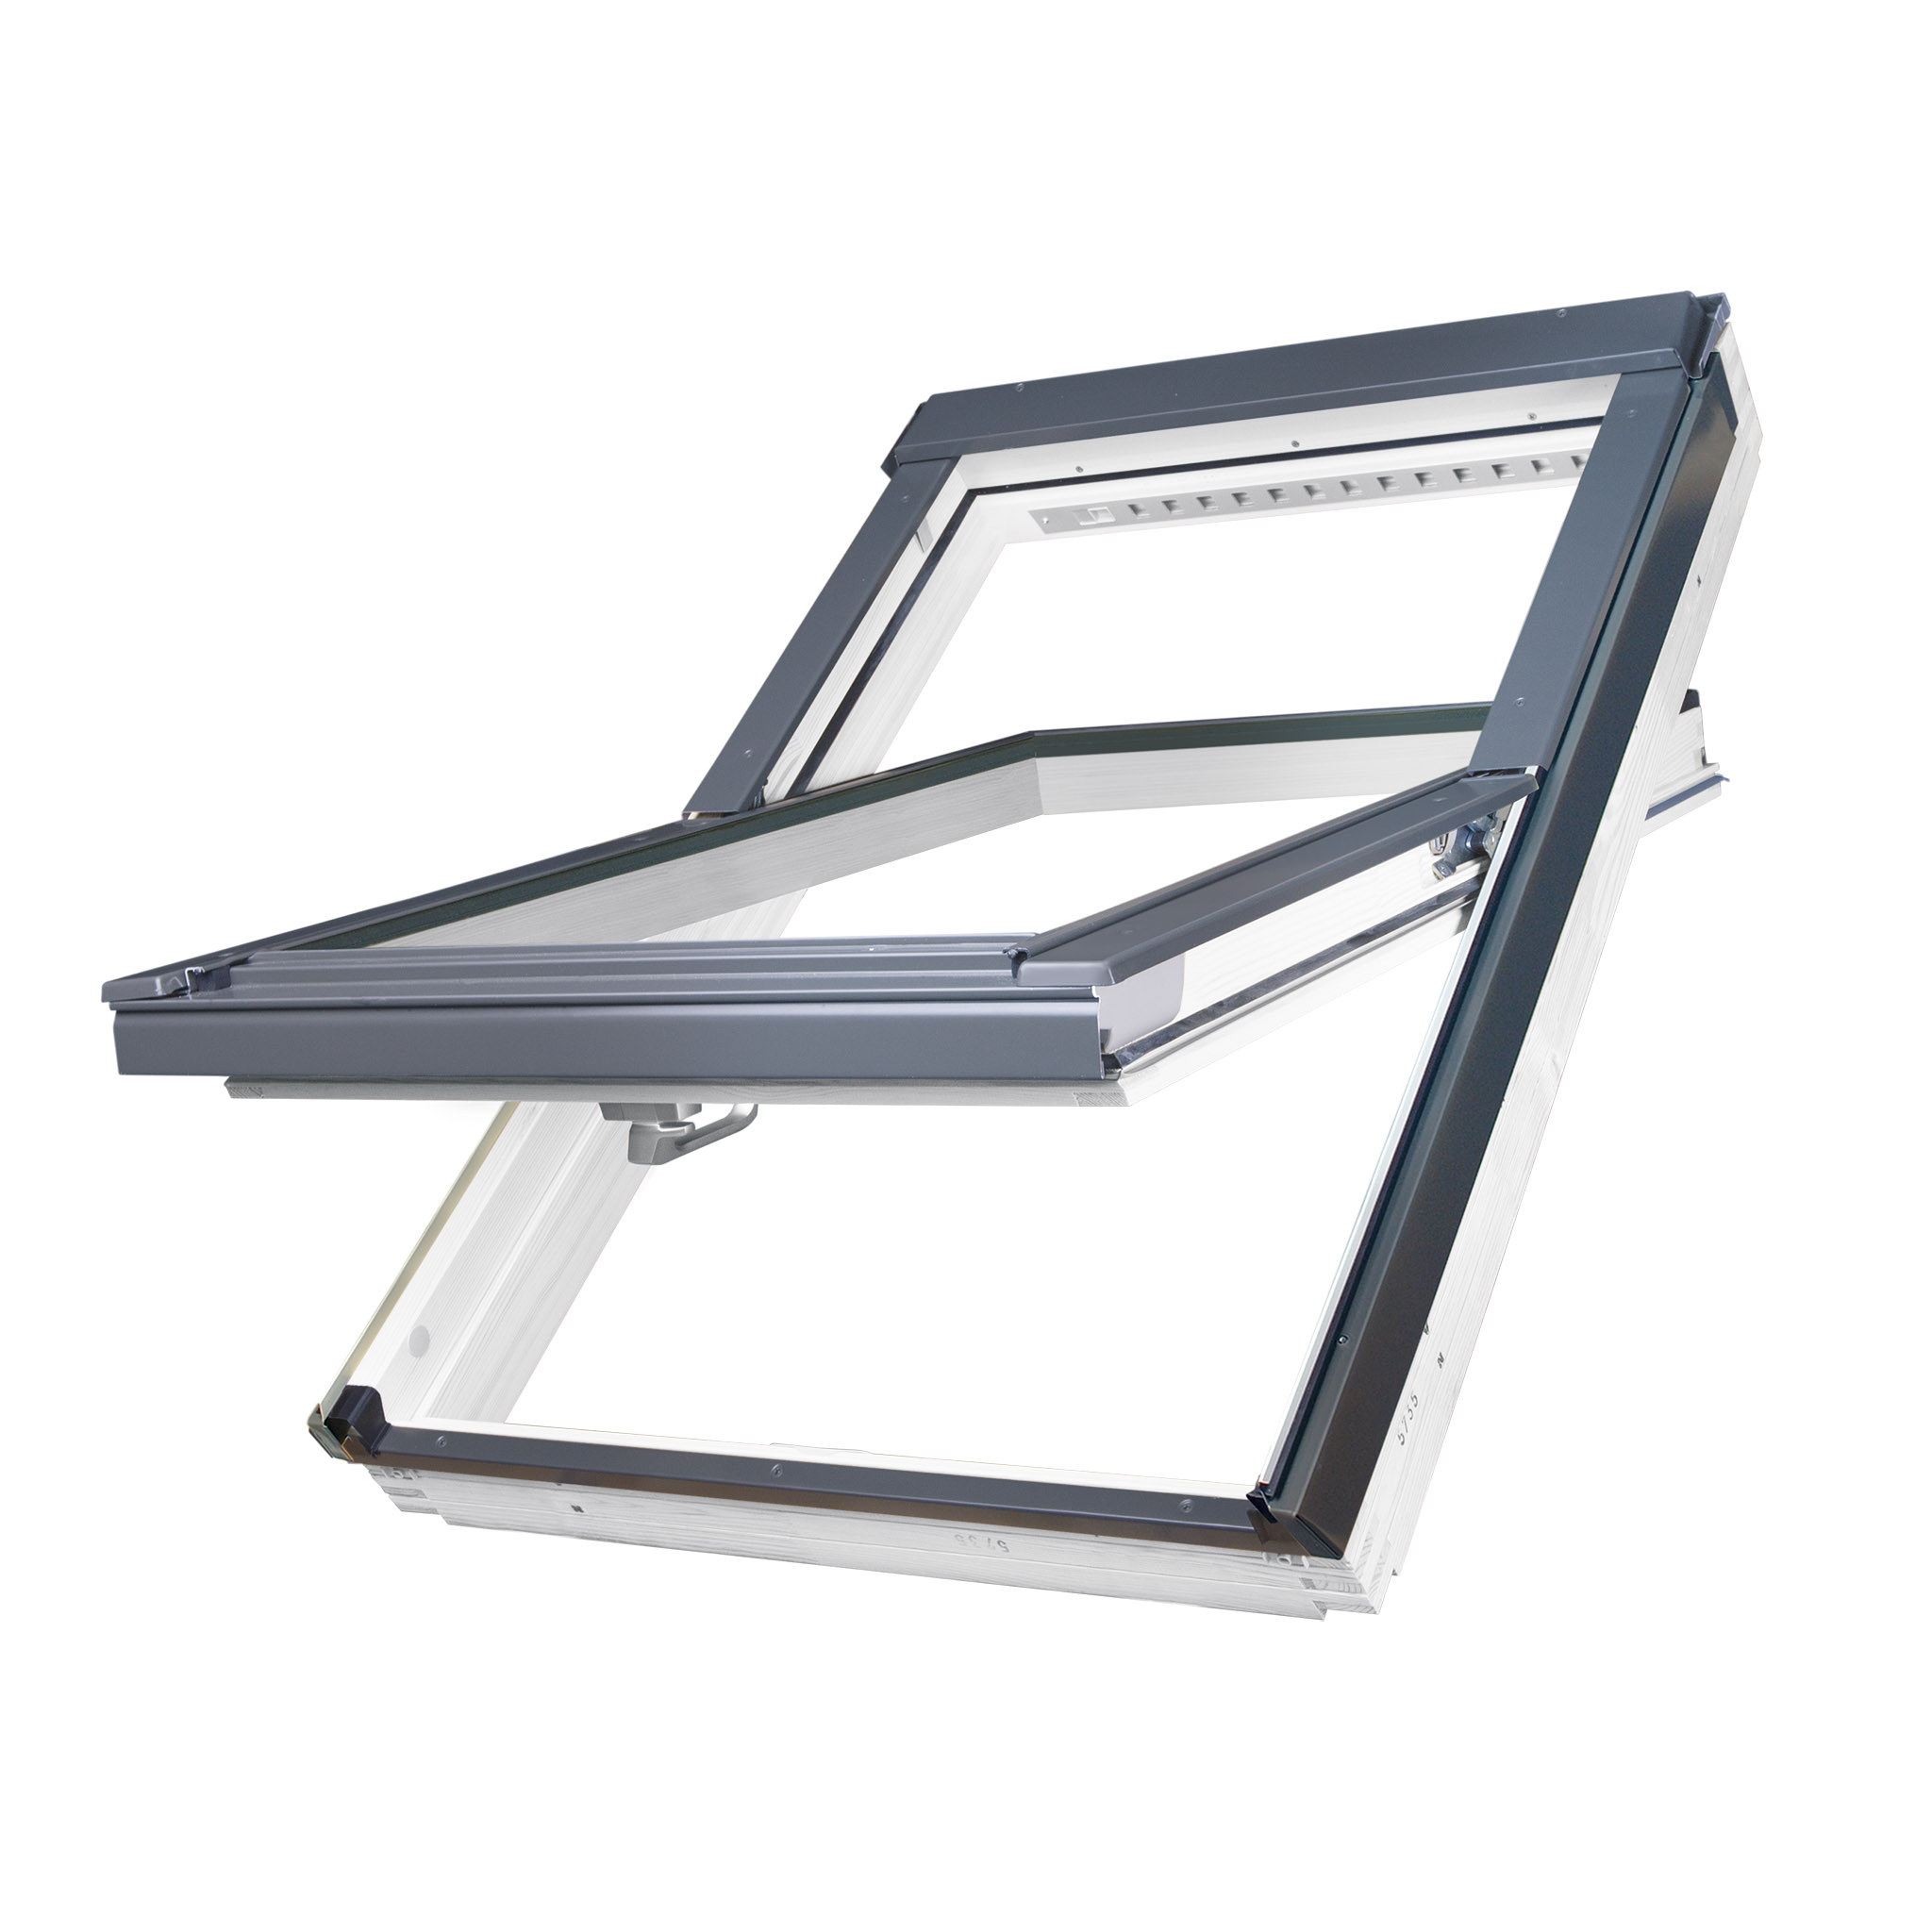 Fakro Centre Pivot Roof Window Pitched